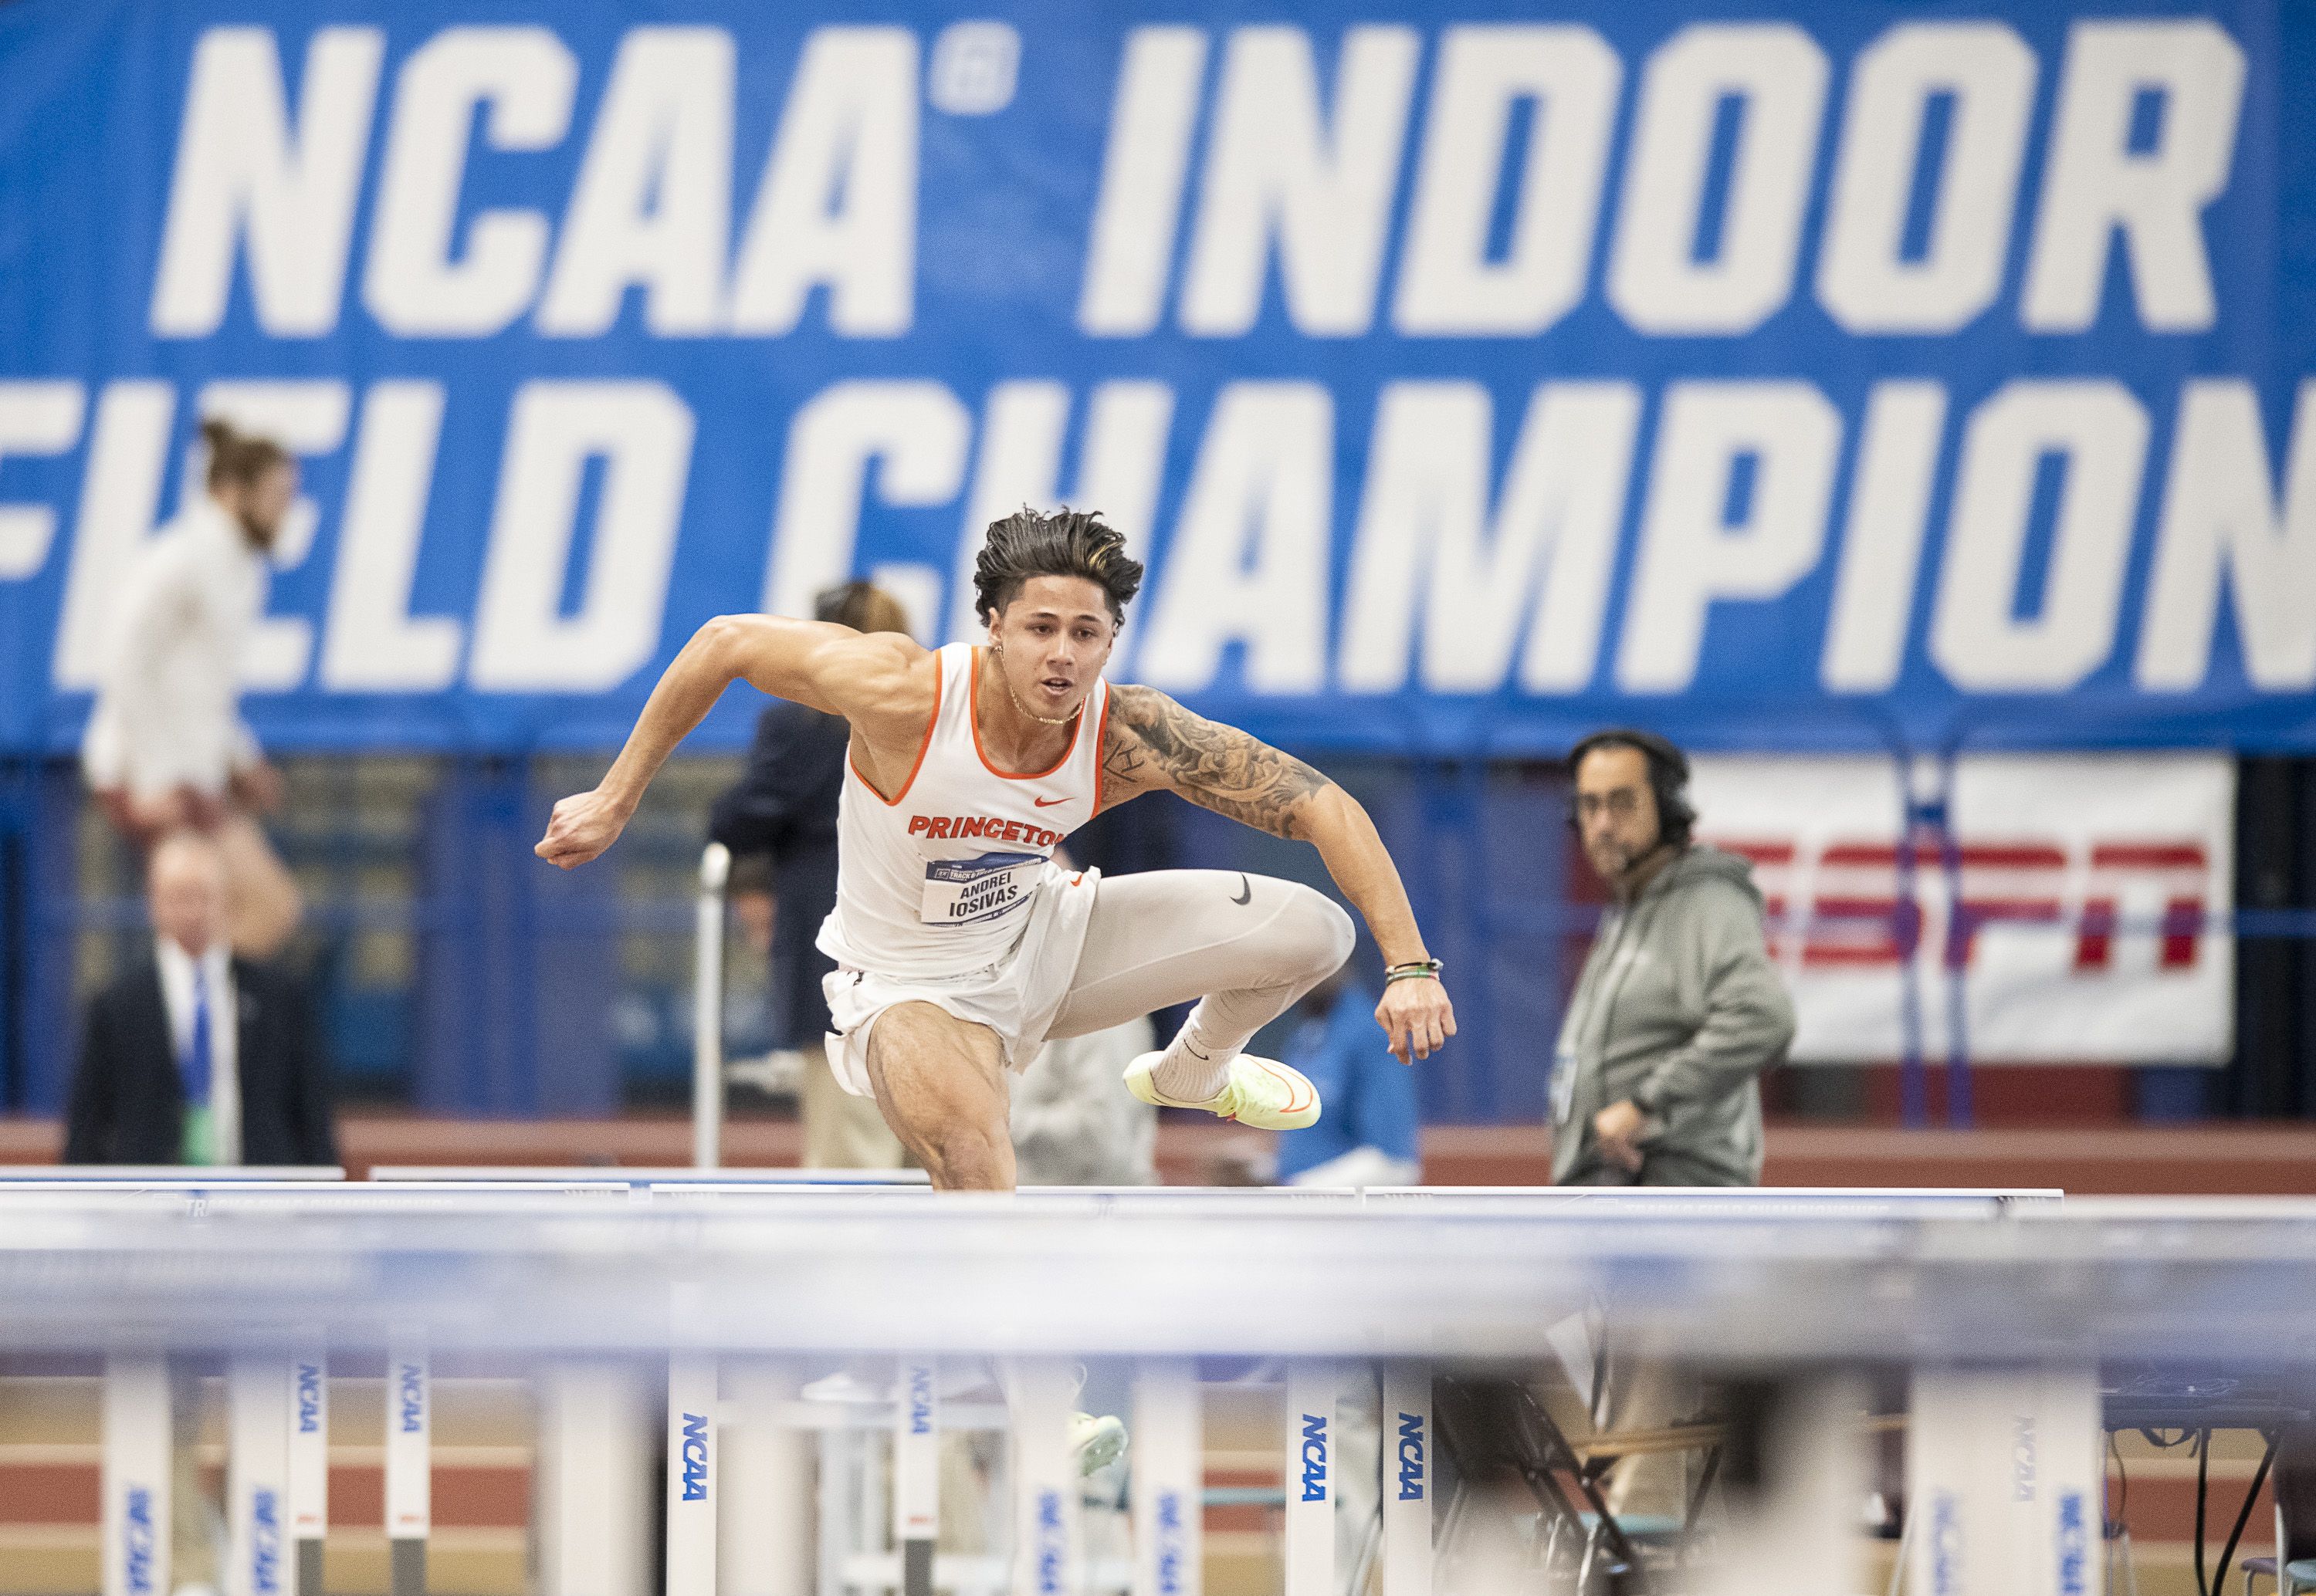 ncaa track and field championships live stream